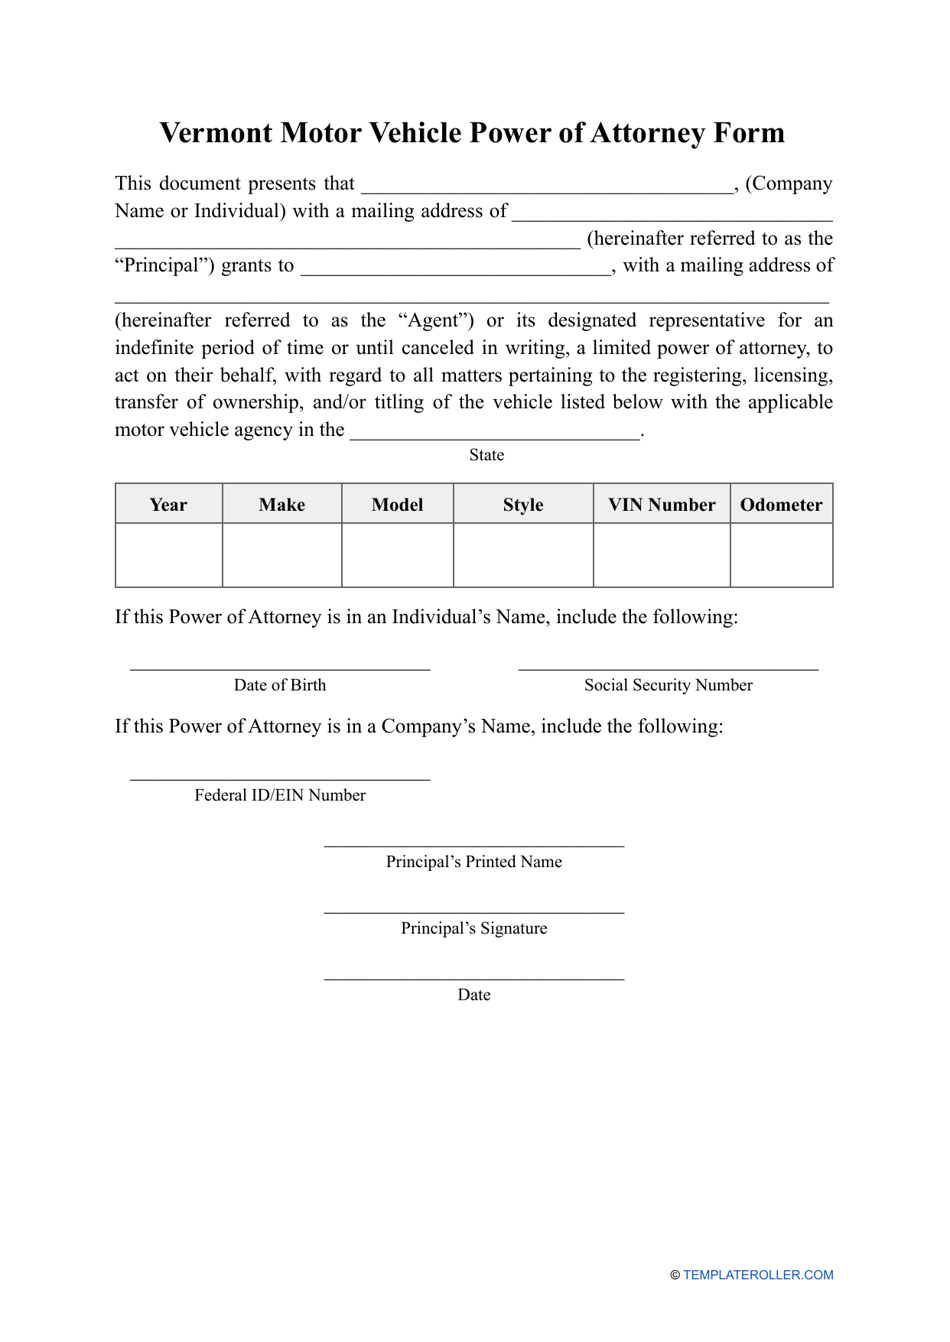 Motor Vehicle Power of Attorney Form - Vermont, Page 1